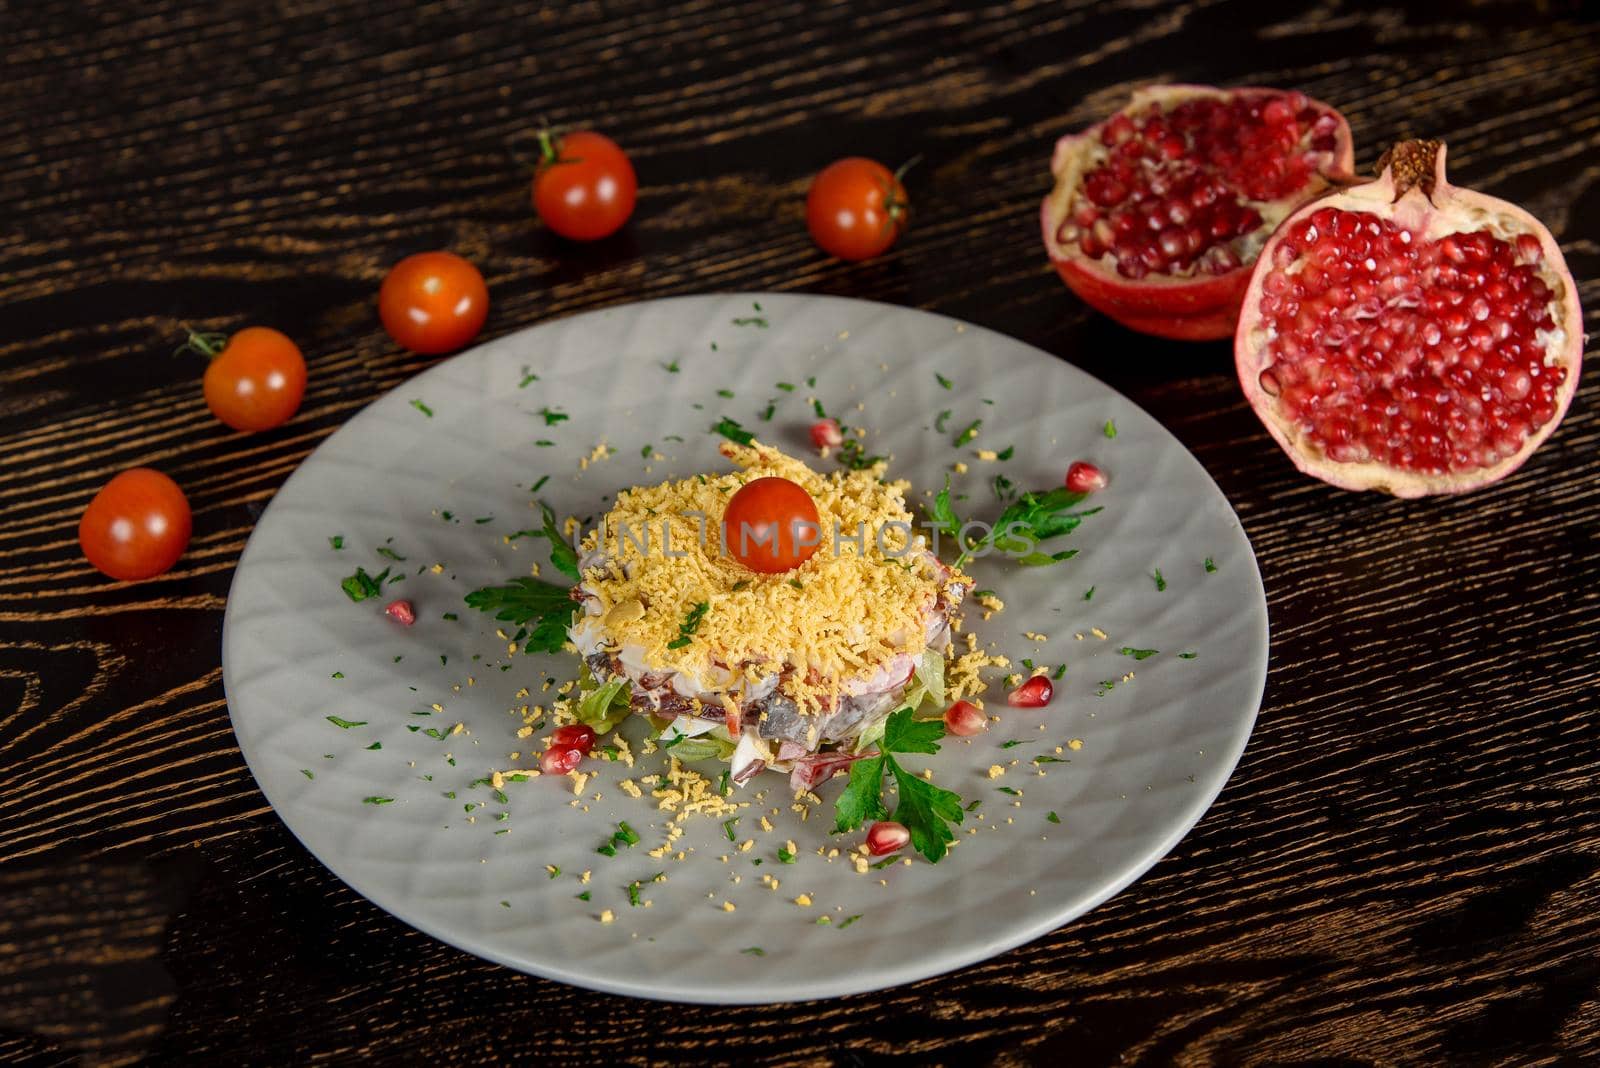 Puff salad with meat, vegetables, cheese, eggs, garnished with herbs and pomegranate and cherry tomatoes on a gray plate. Against the background of halves of pomegranate and cherry tomatoes. by Rabizo